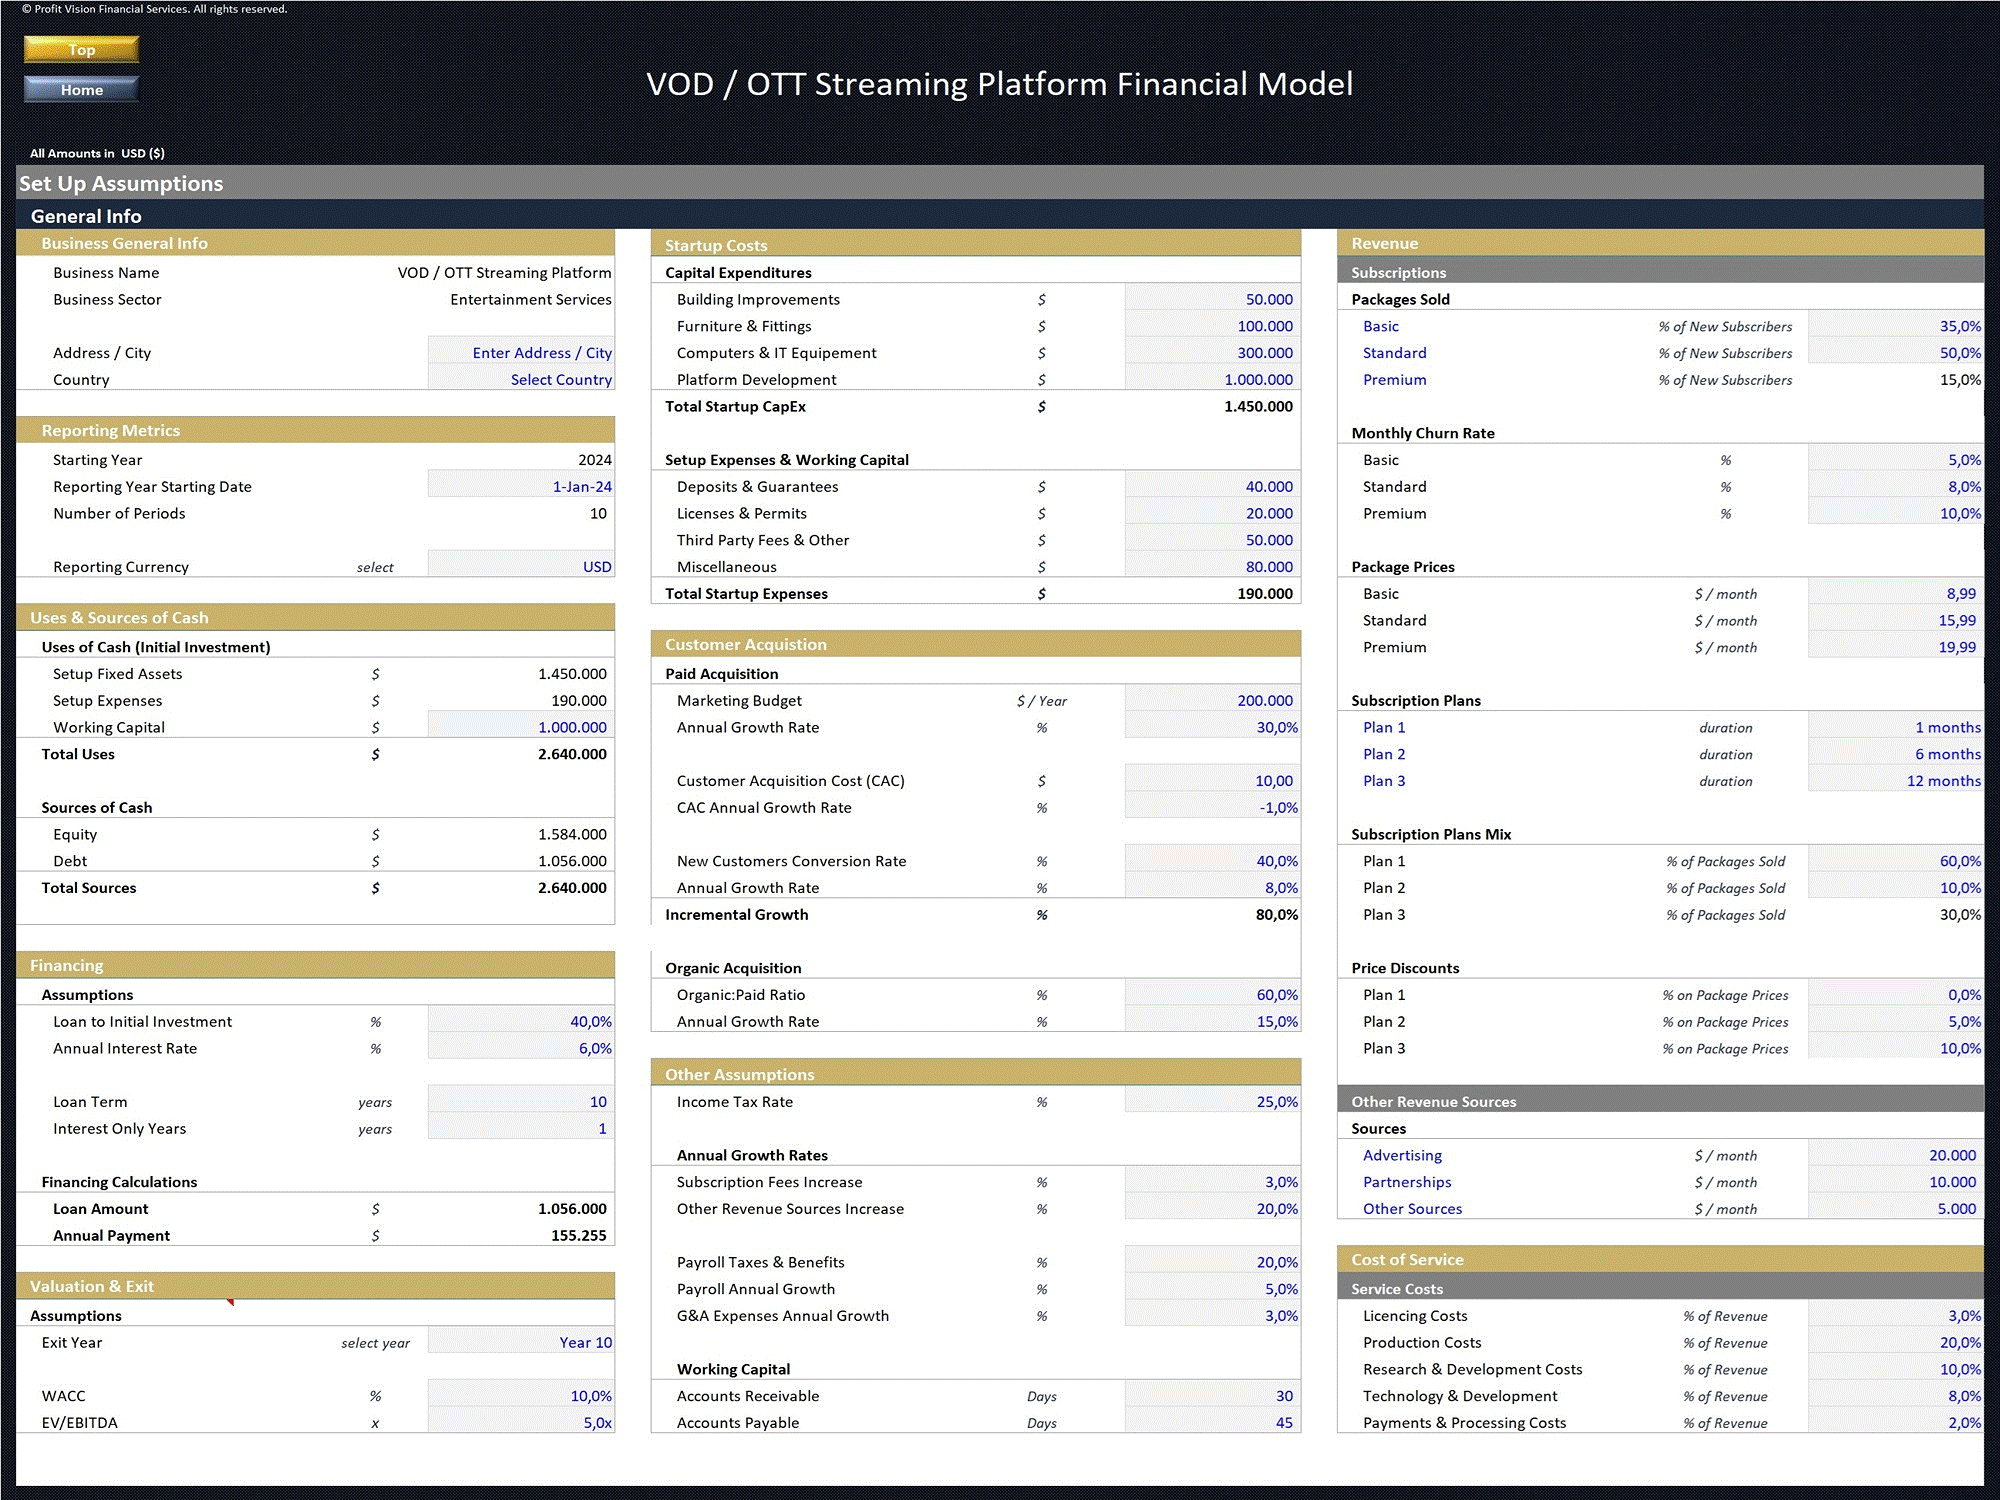 VOD/OTT Streaming Platform - 10 Year Financial Model (Excel template (XLSX)) Preview Image